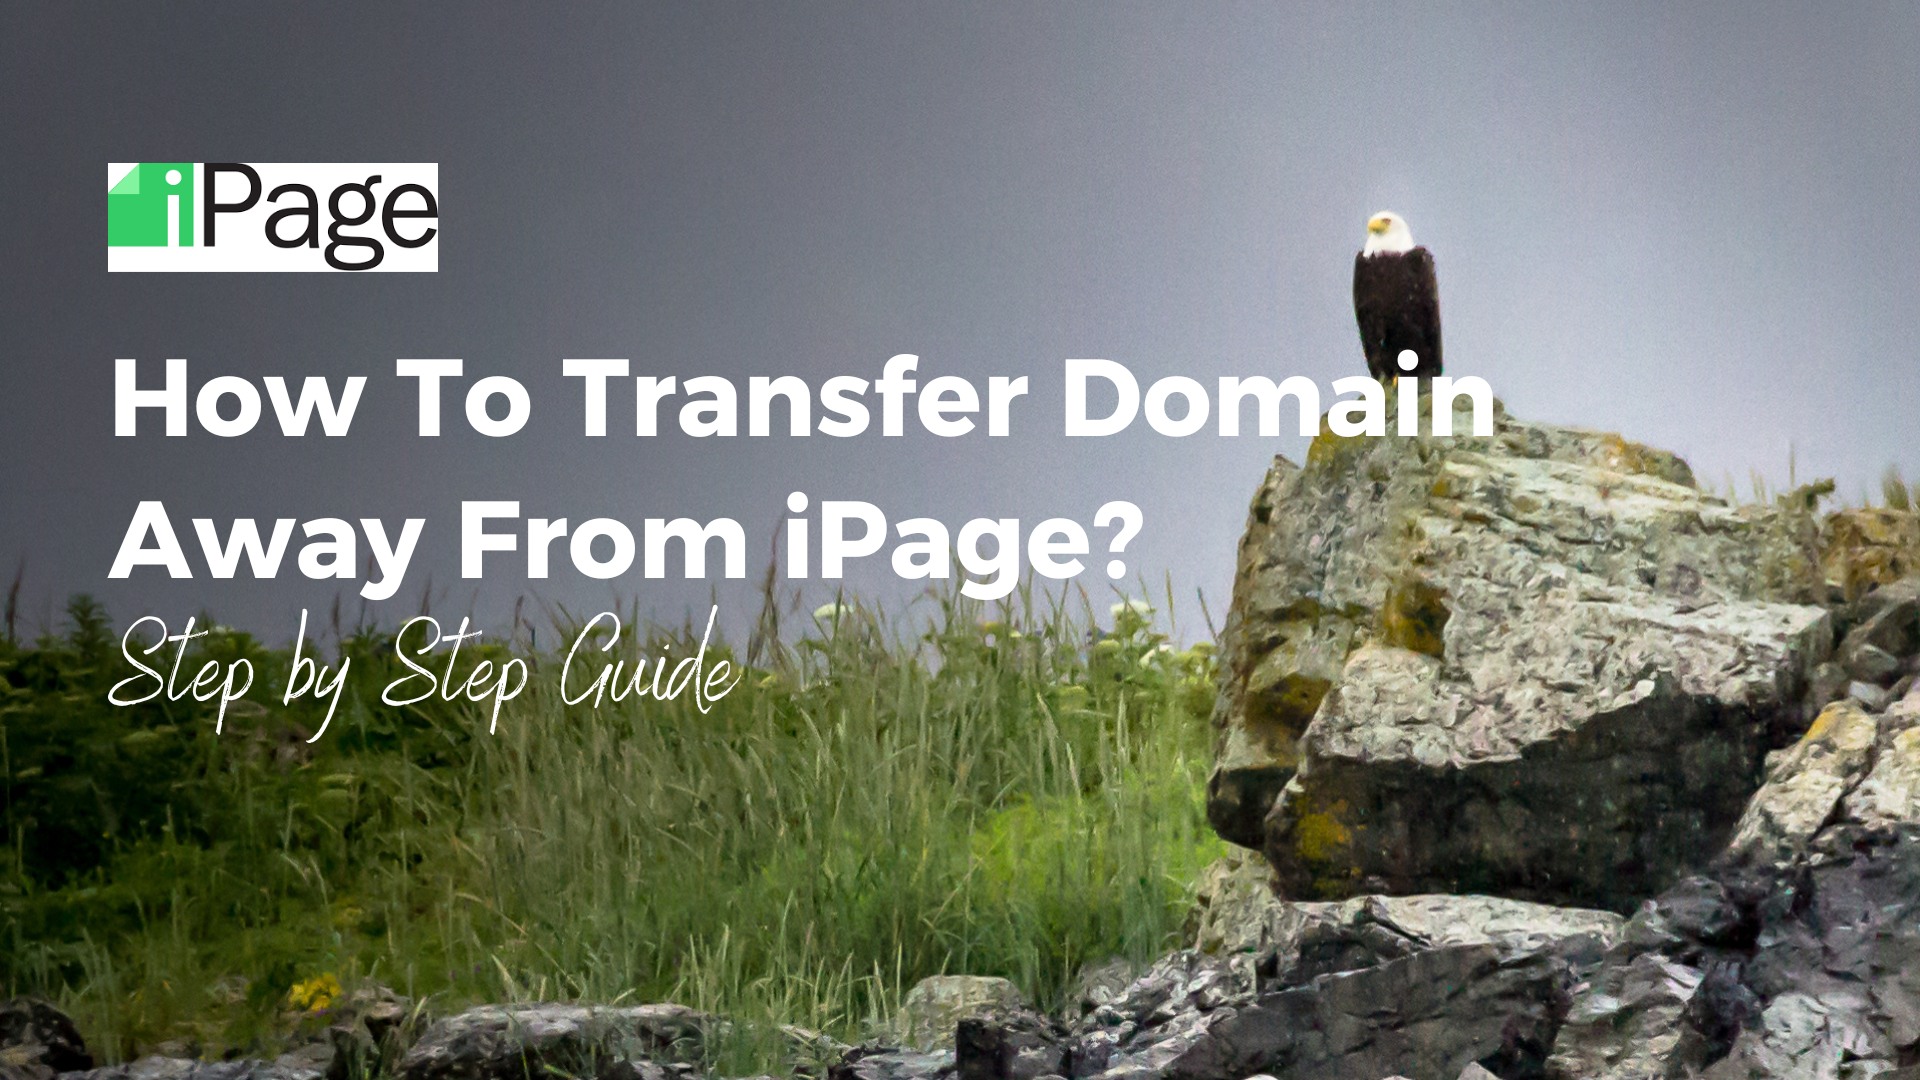 Transfer domain away from iPage